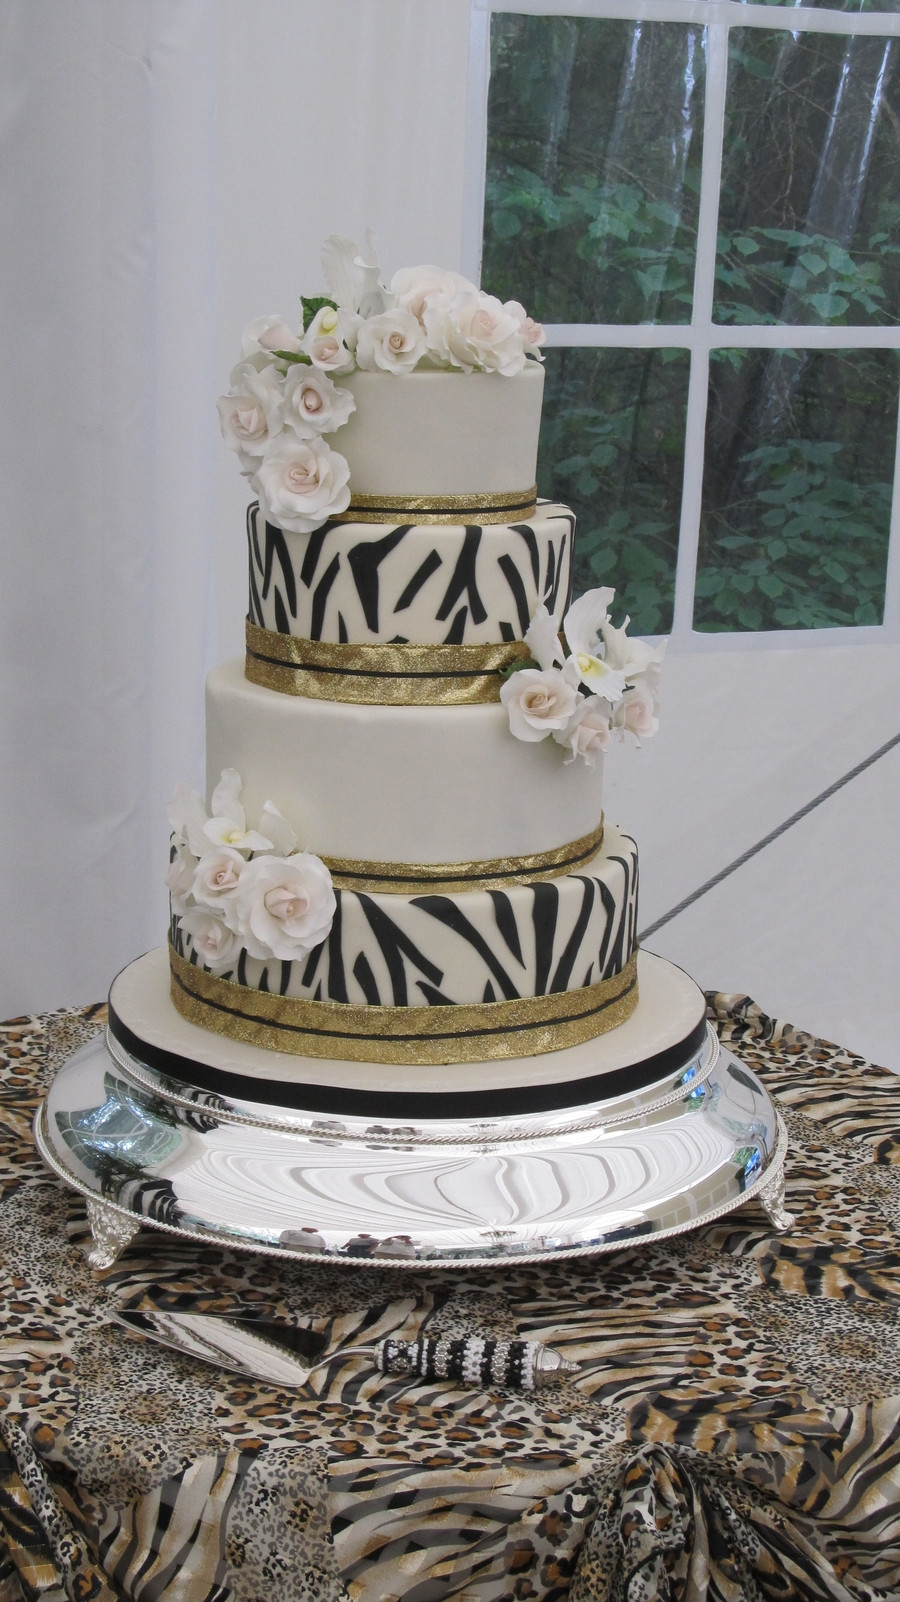 African Wedding Cakes
 Kate s African Theme Wedding Cake CakeCentral